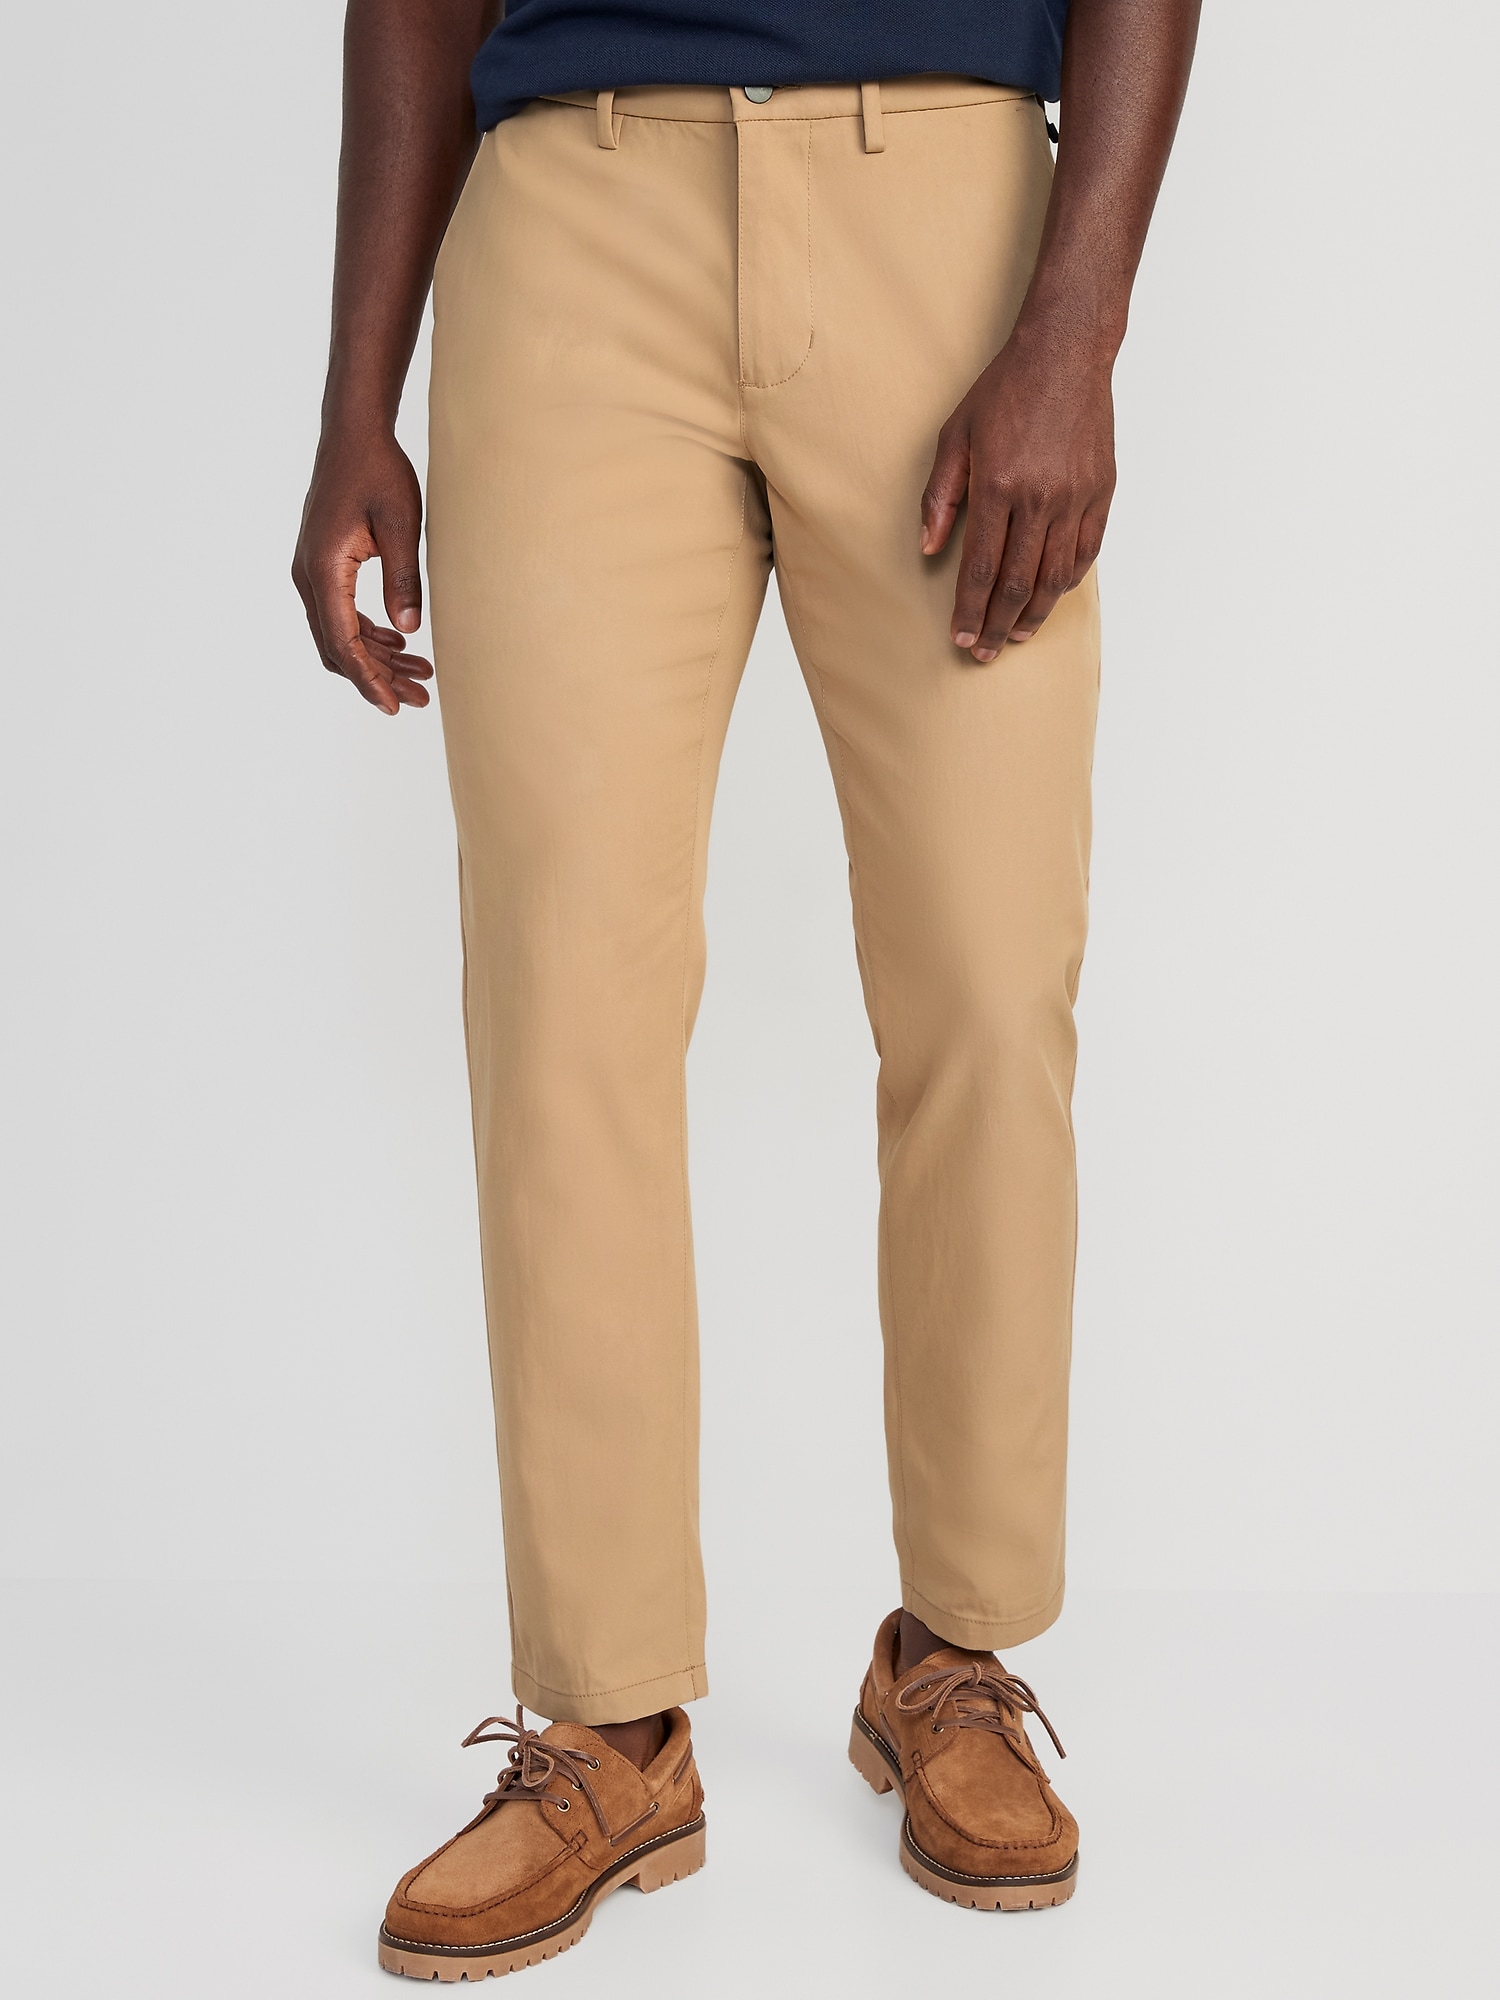 Athletic Ultimate Tech Built-In Flex Chino Pants for Men | Old Navy